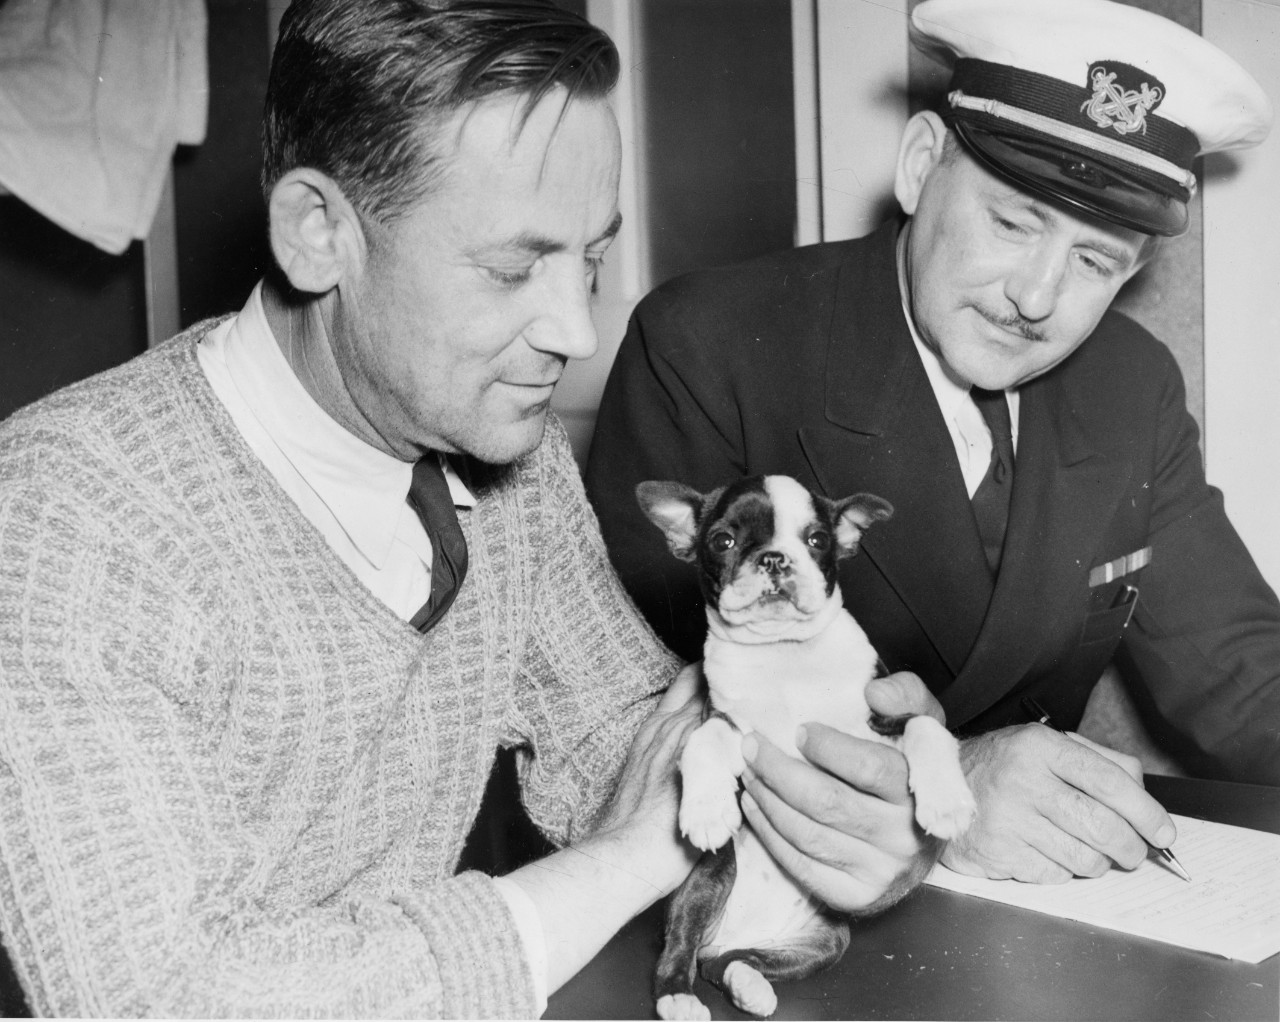 Capt. George Fisk, Empire Thrush’s master, holds “Elizabeth,” his 5-week old Boston Bulldog, during the debriefing of his ship’s crew. (U.S. Navy Photograph 80-CF-105-4A-1, National Archives and Records Administration, Still Pictures Branch, Coll...